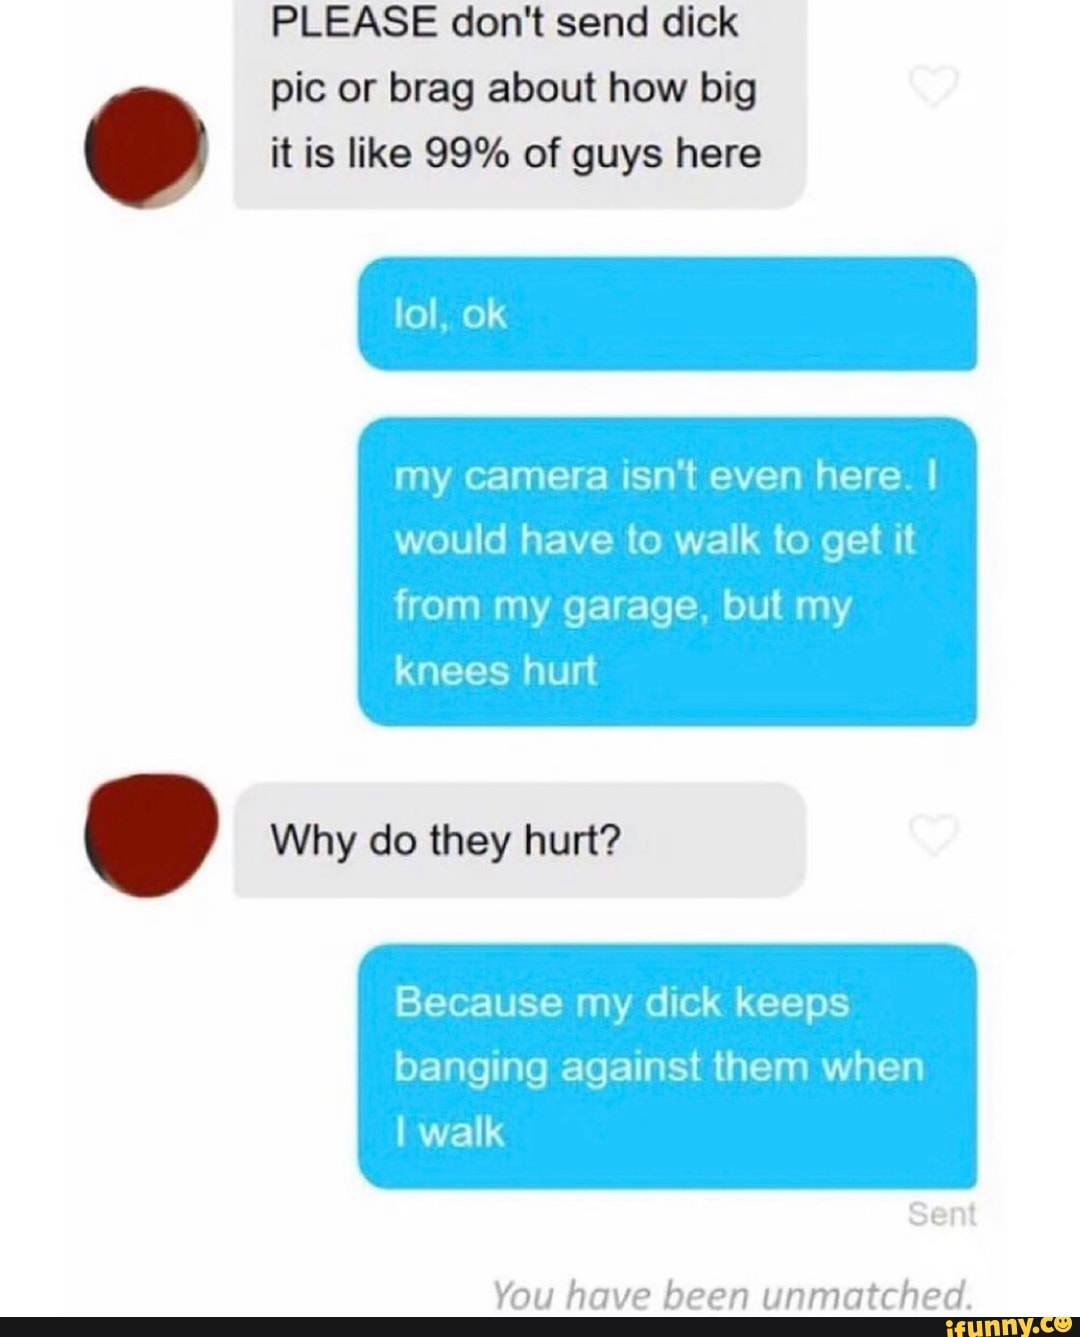 How to send a fake dick pic